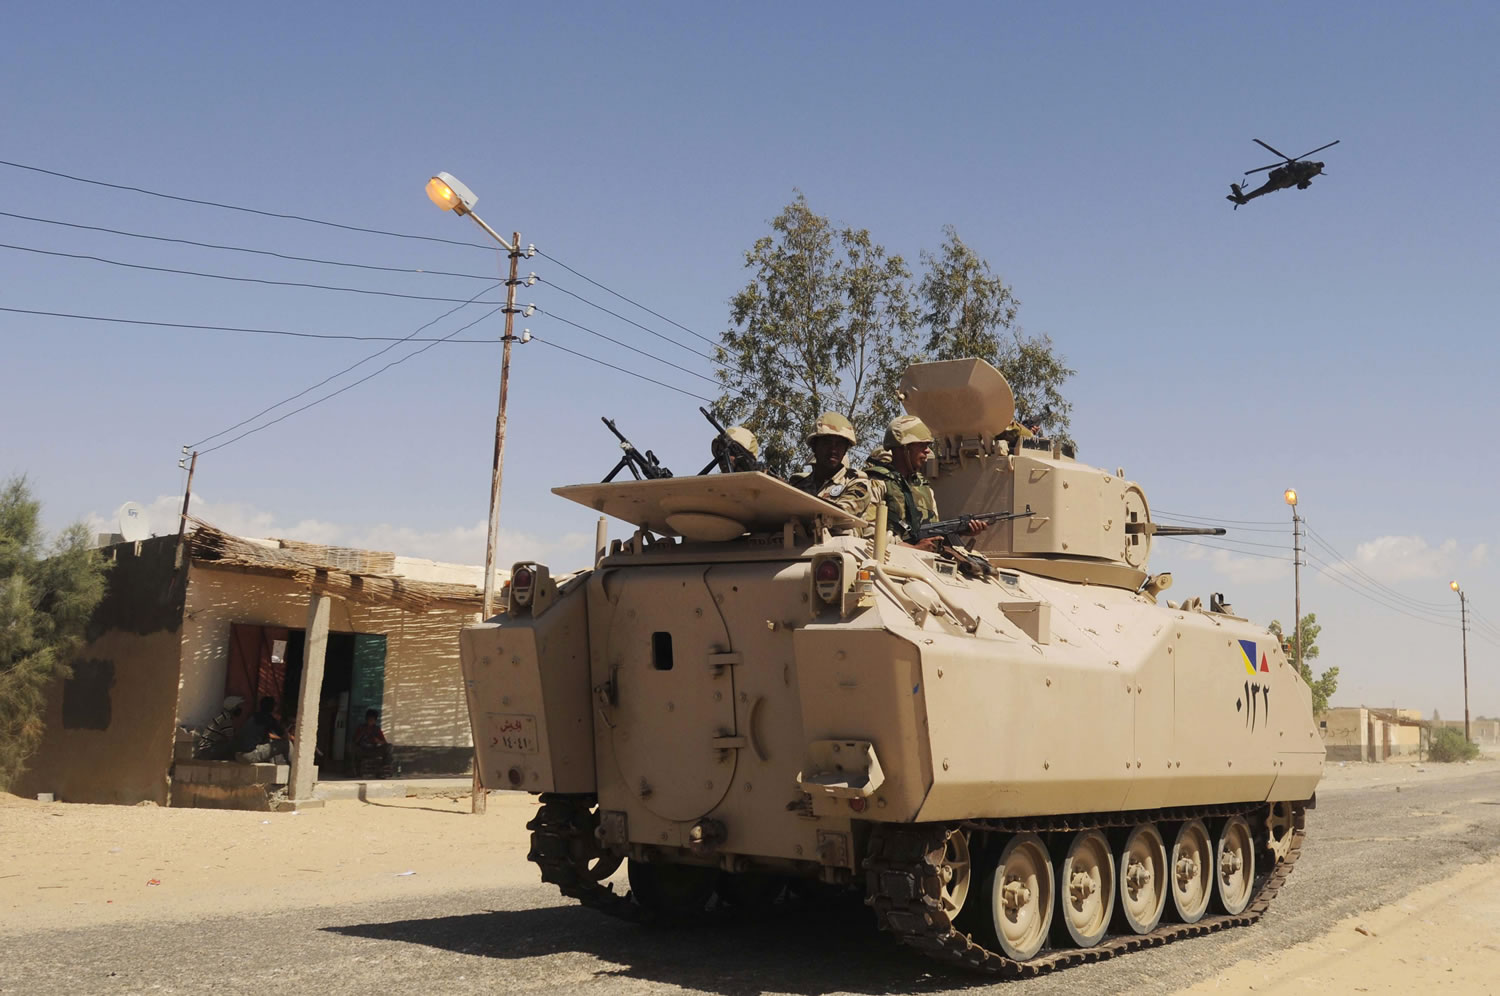 Egyptian Army soldiers patrol in an armored vehicle backed by a helicopter gunship during a May sweep through villages in Sheikh Zuweyid, northern Sinai, Egypt.